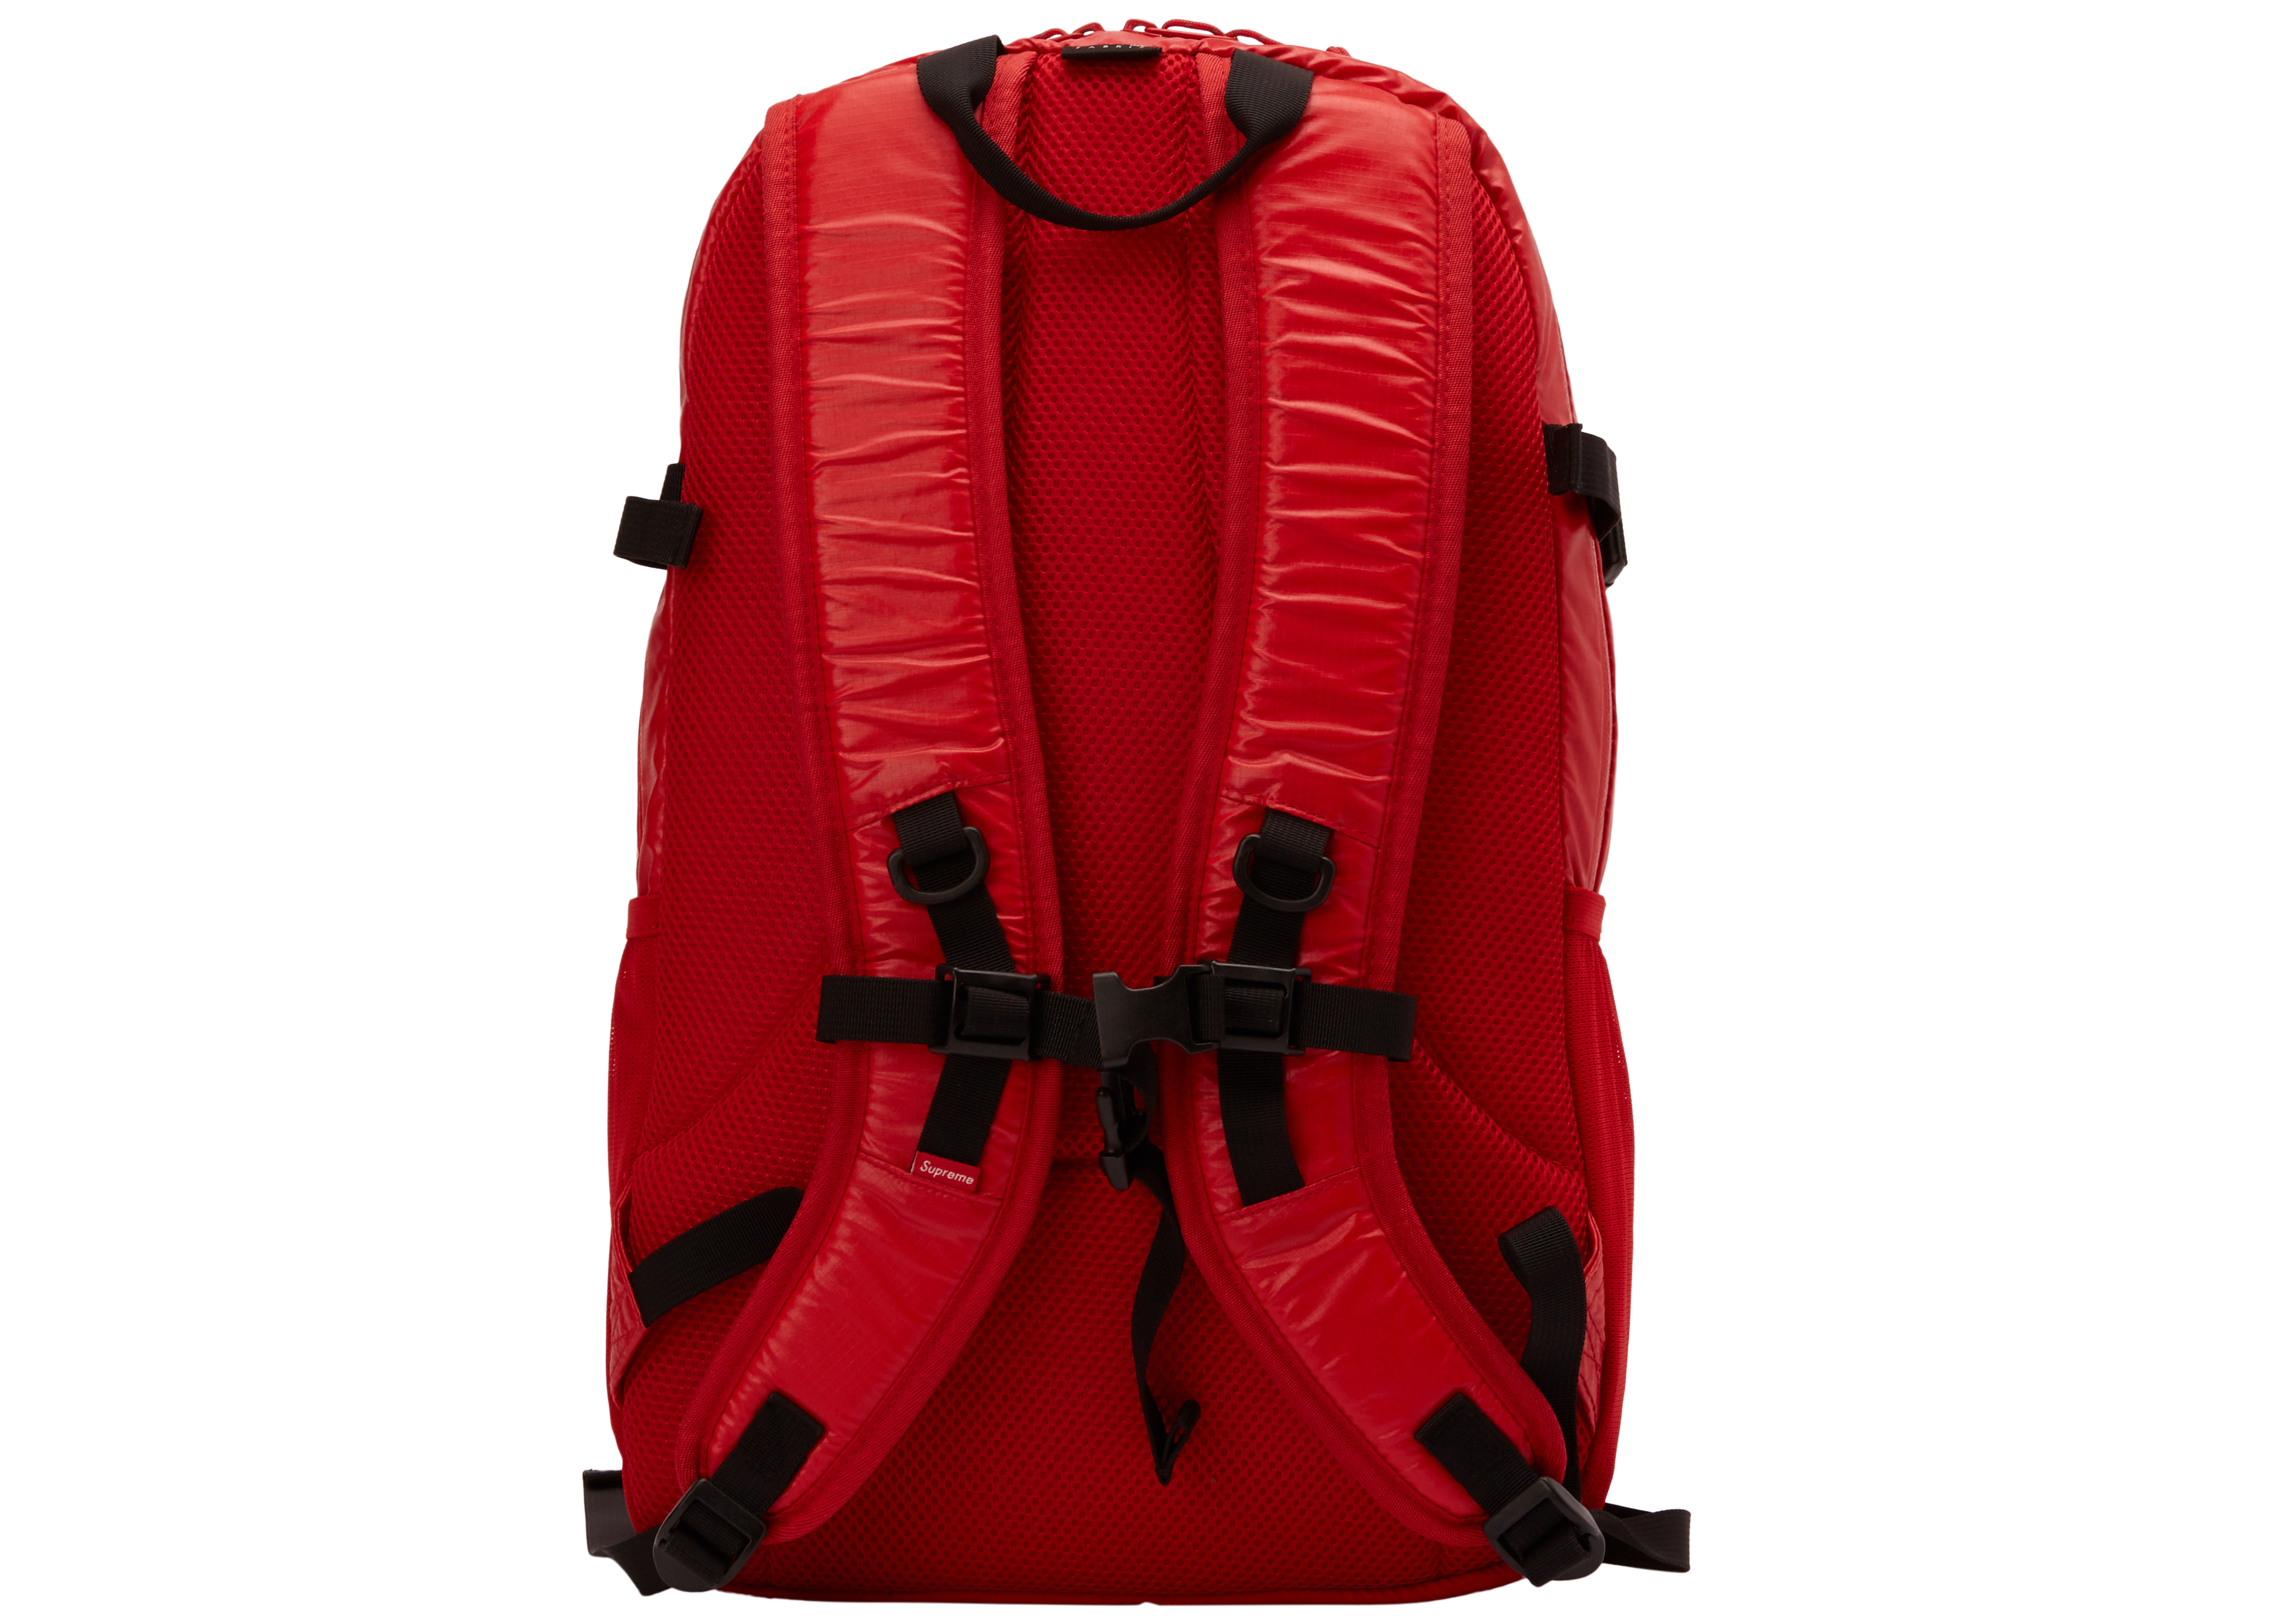 Supreme FW17 Backpack Red - FW17 - US